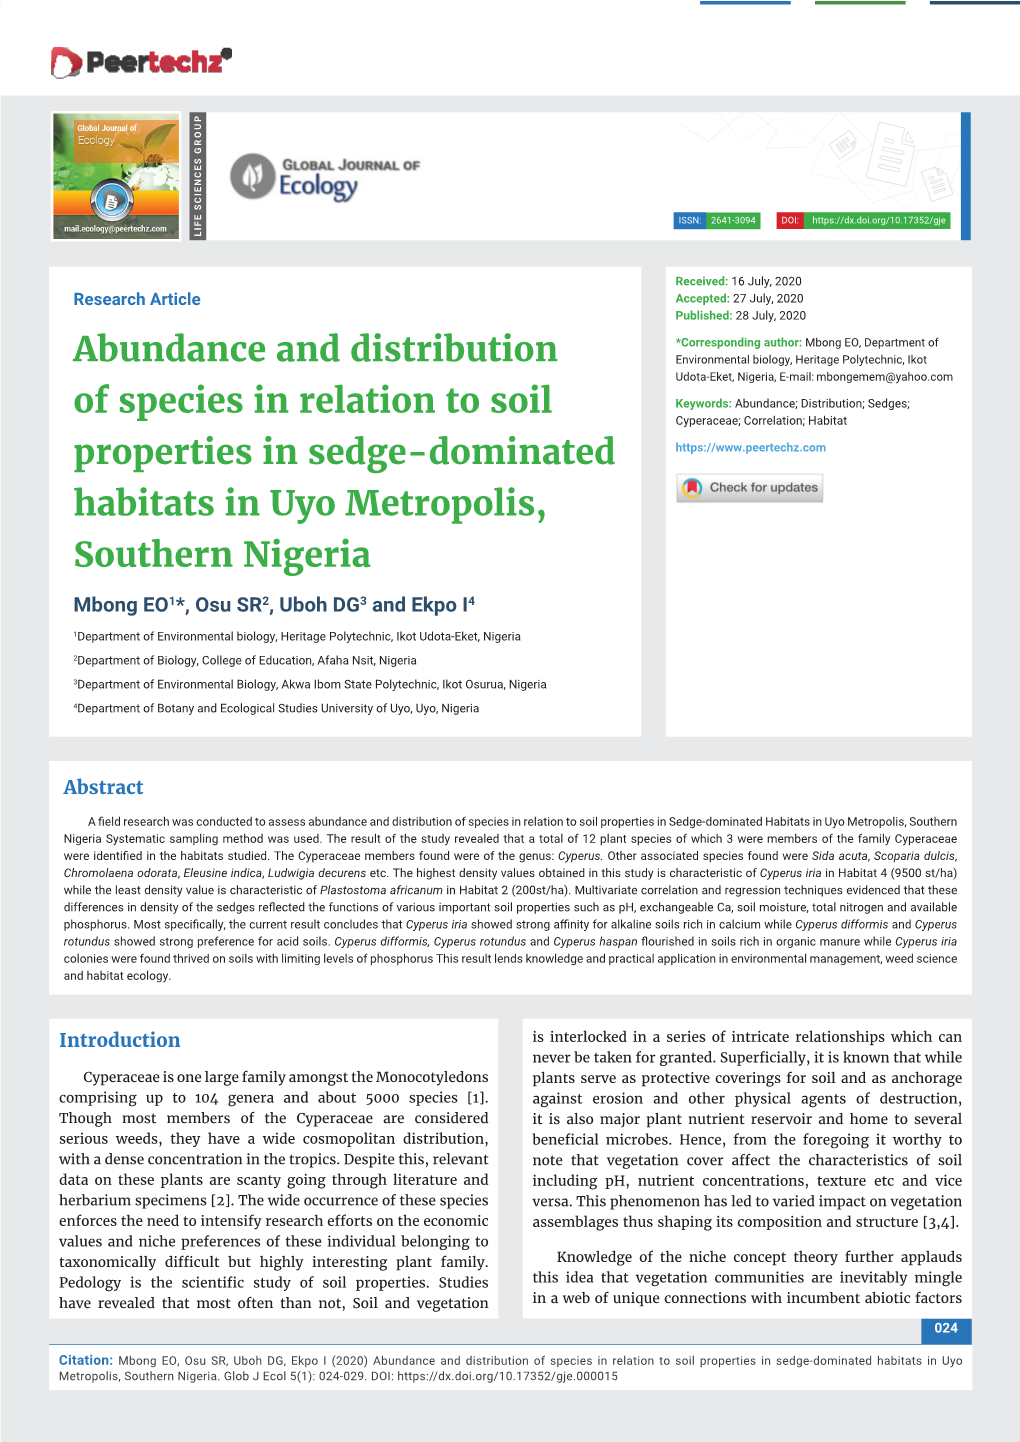 Abundance and Distribution of Species in Relation to Soil Properties In